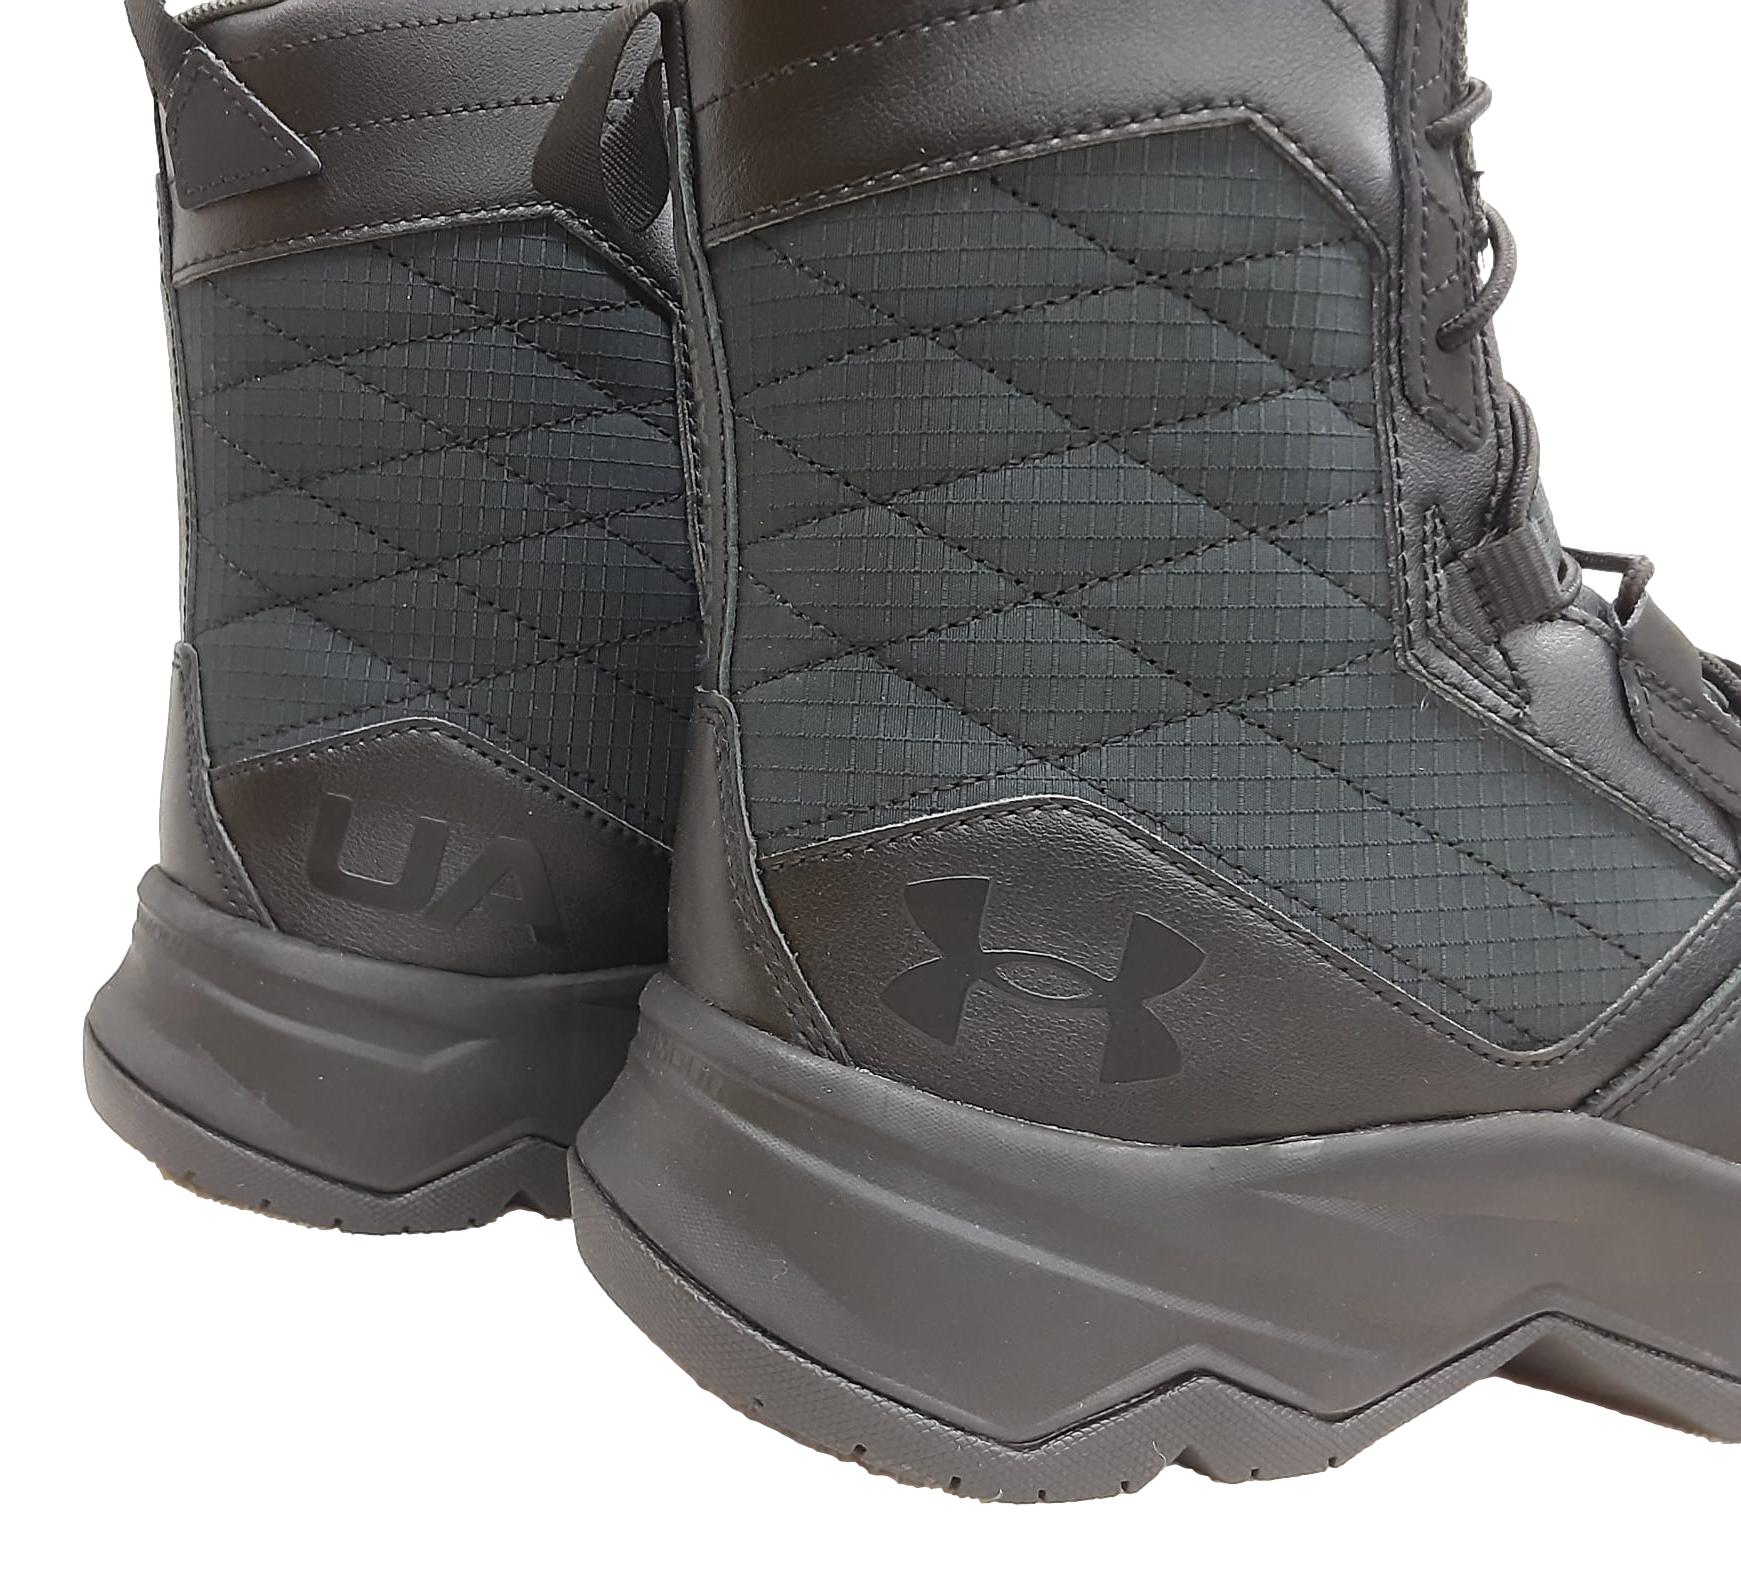 Men’s Under Armour Stellar G2 Protect Tactical Boots